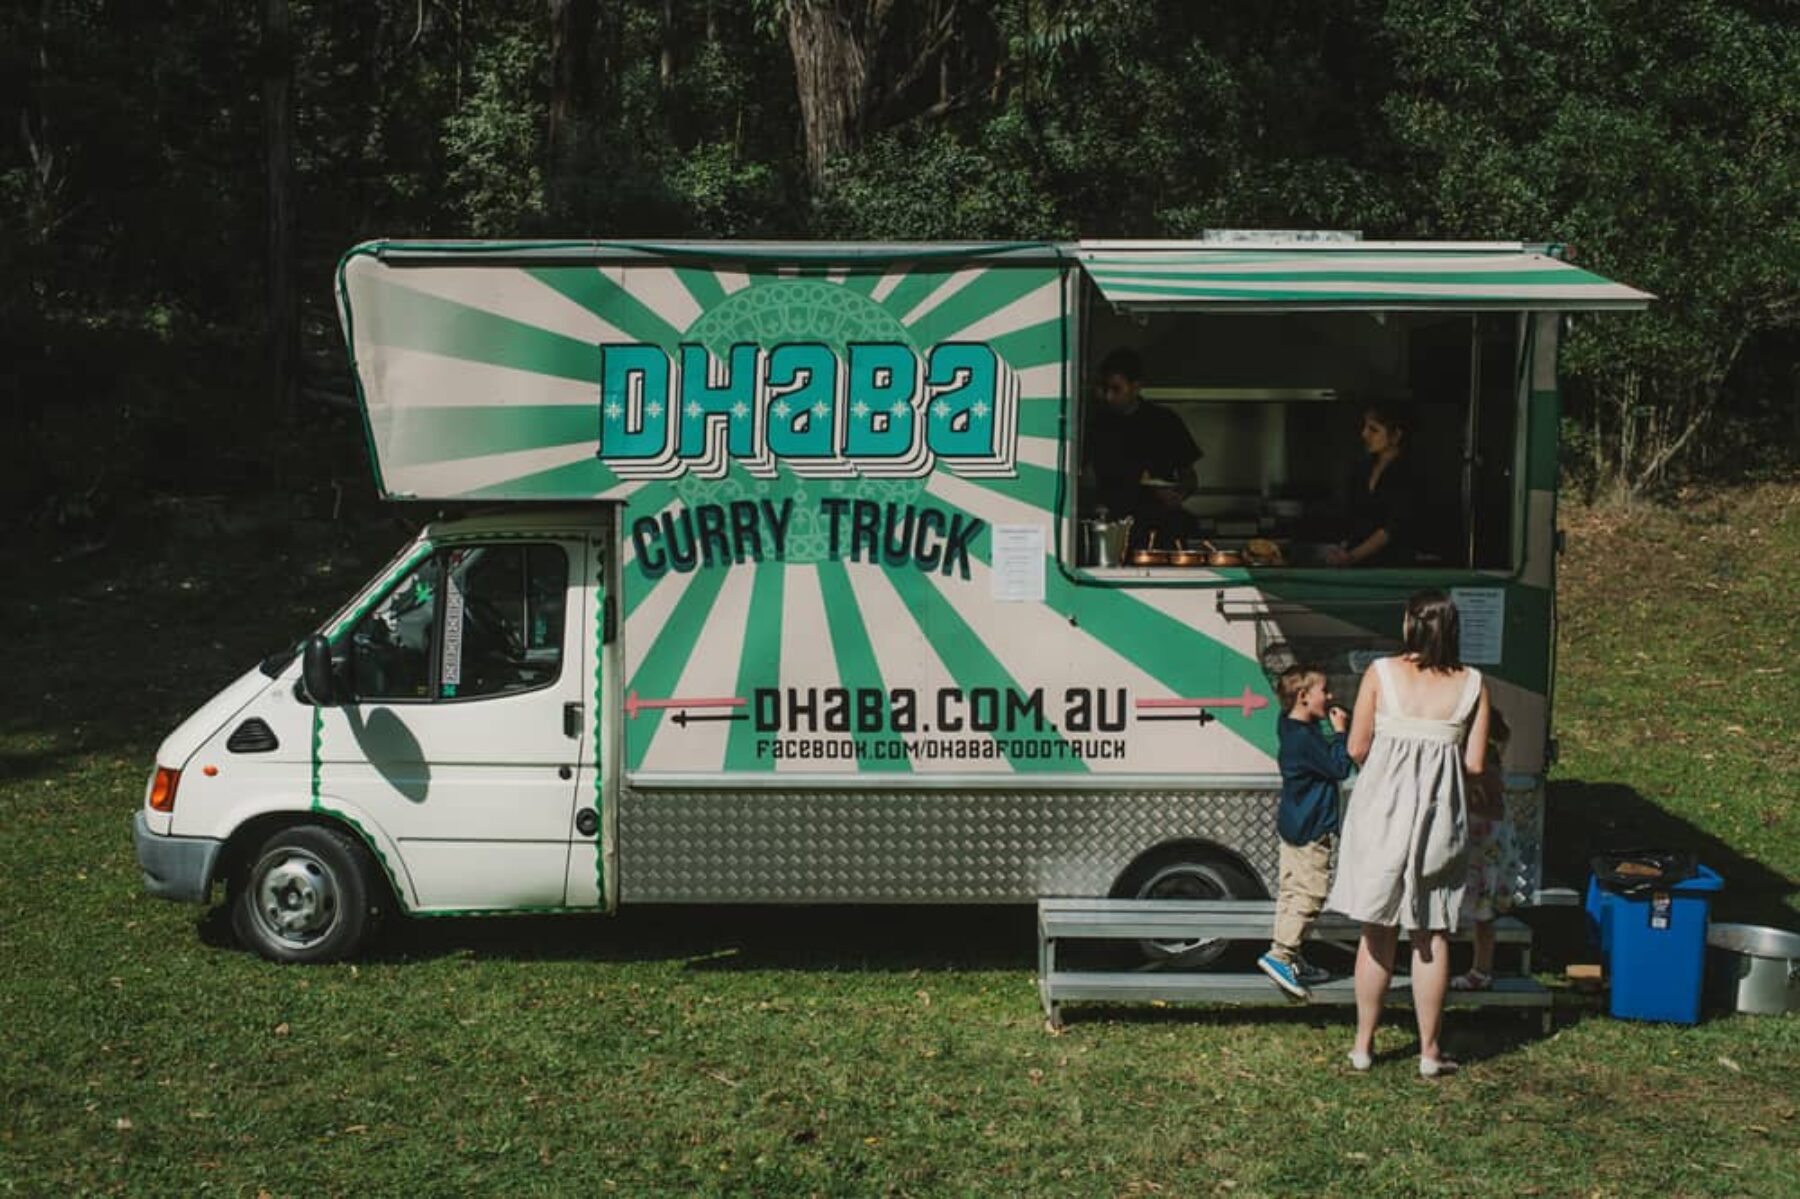 Melbourne food truck wedding / Photography by She Takes Pictures he Makes Films